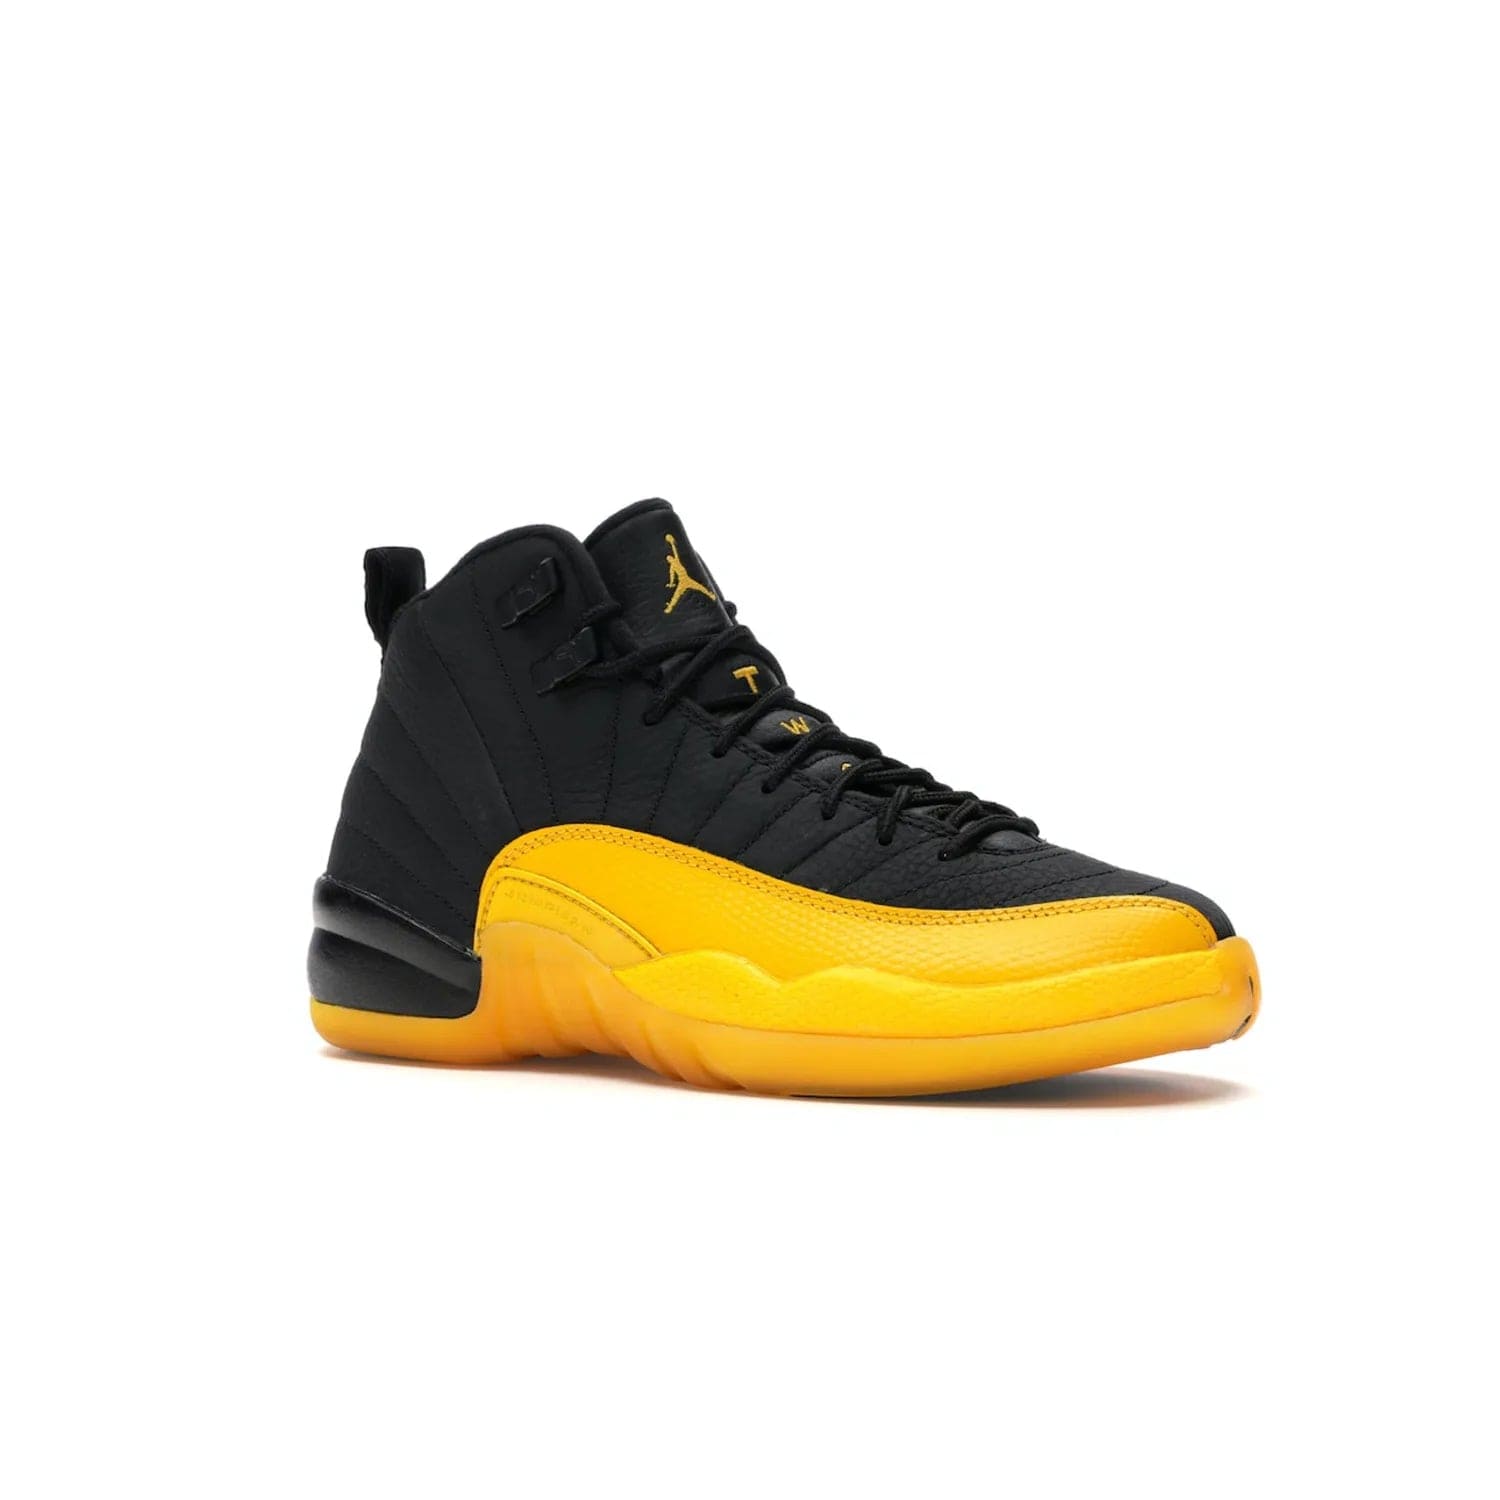 Jordan 12 Retro Black University Gold (GS) - Image 4 - Only at www.BallersClubKickz.com - Upgrade your kid's shoe collection with the Jordan 12 Retro Black University Gold. With classic style, black tumbled leather upper, and University Gold accents, it's a great summer look. Out July 2020.